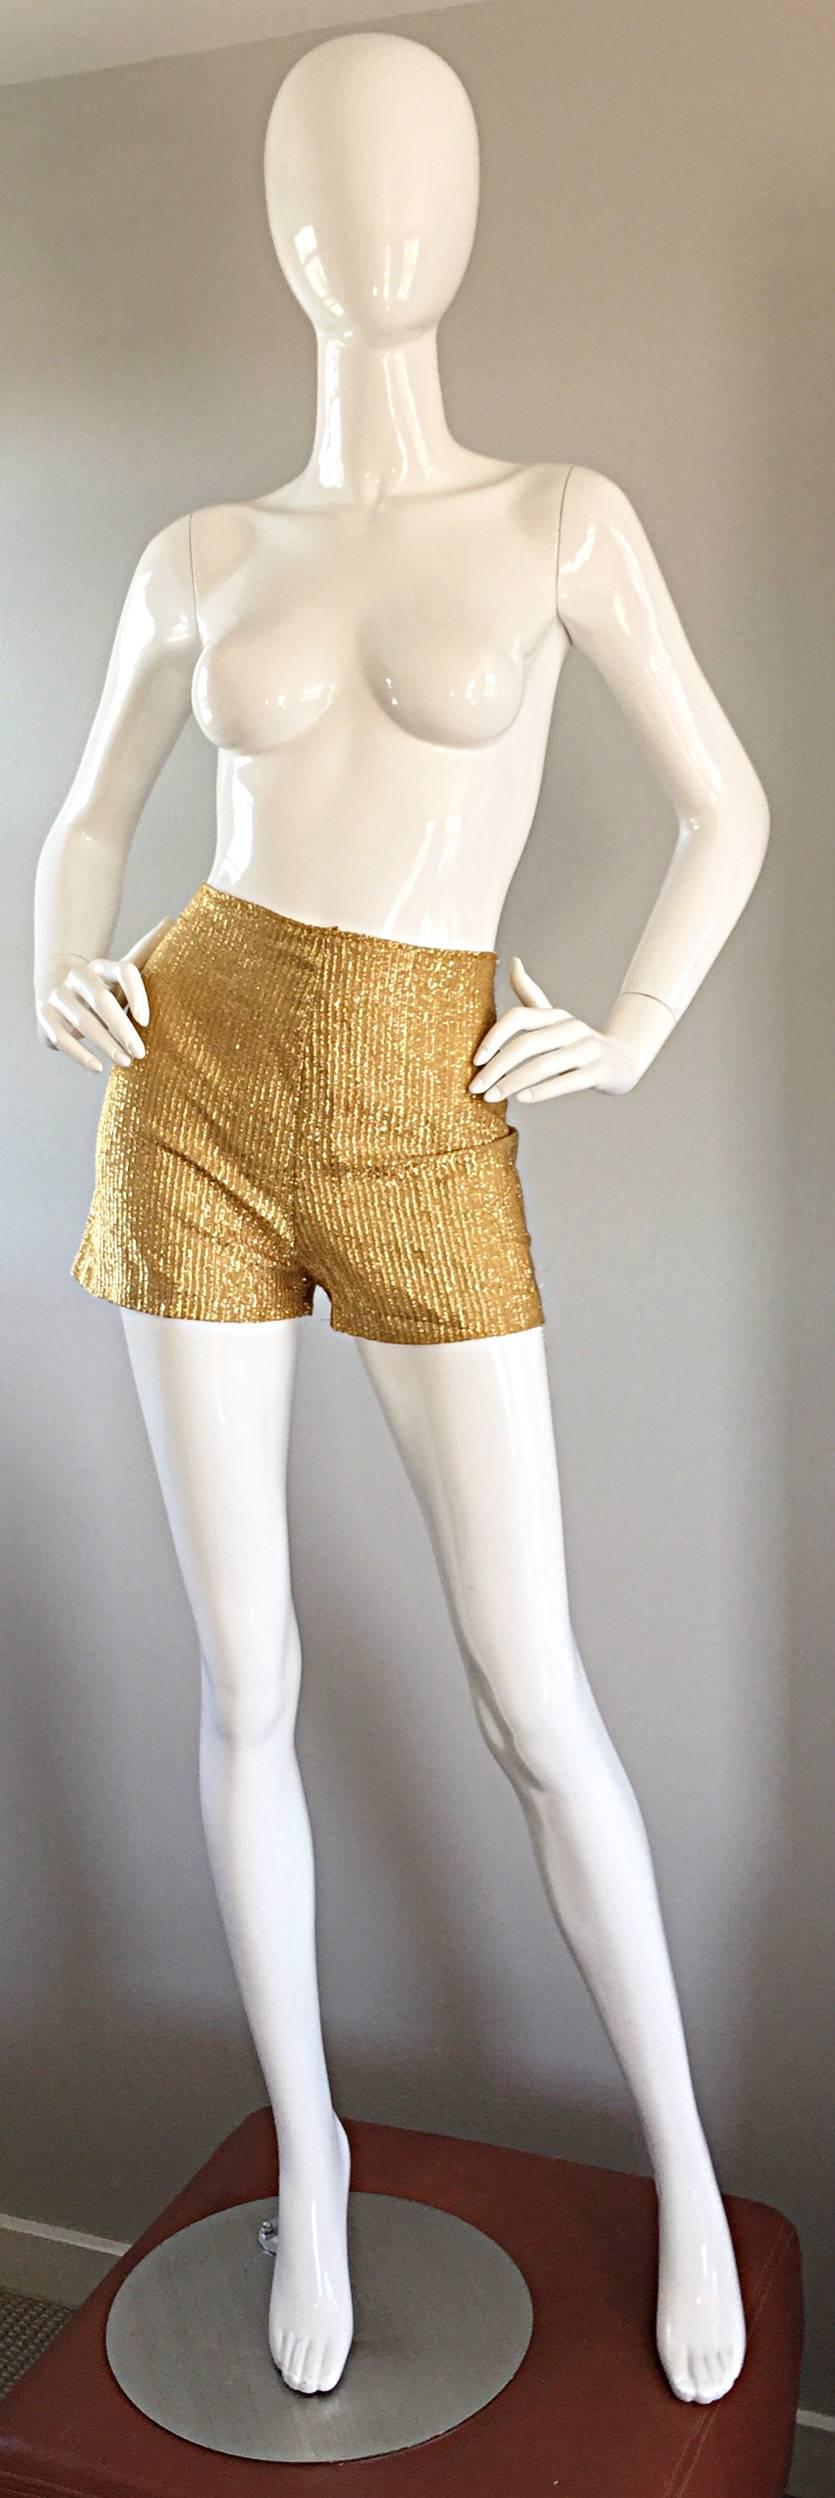 Incredible, and rare vintage 70s HENRY HIGGINS three piece ensemble! Gold and blue metallic dress, with vibrant oriental theme, along with clear rhinestone buttons up the bodice. Seperate hot pants (mini shorts) in gold metallic, with hidden zipper